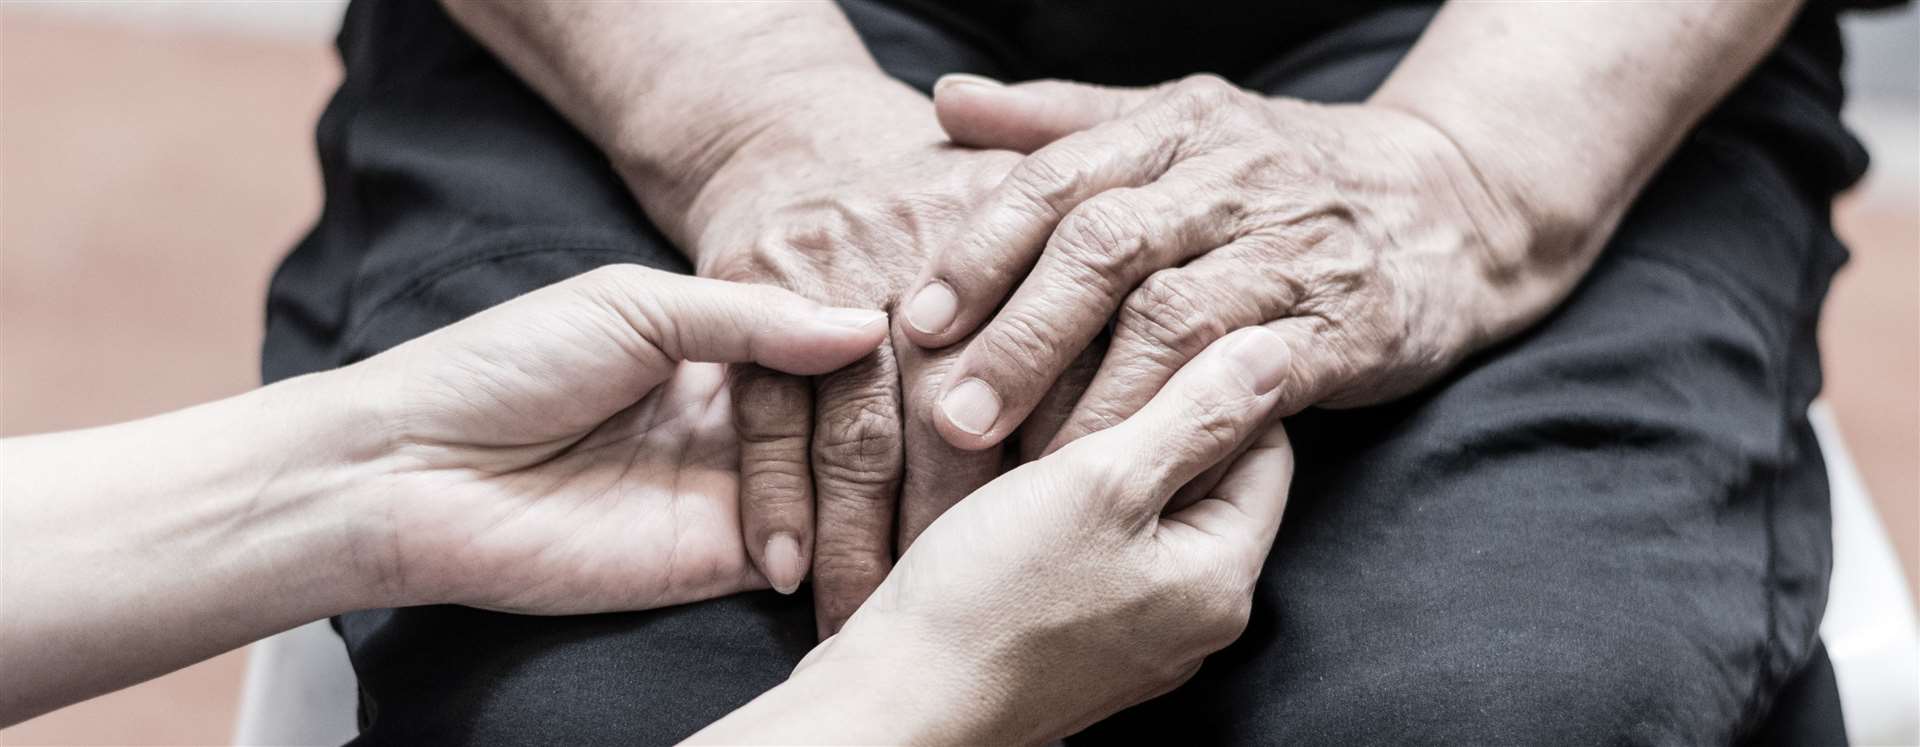 The Scottish Liberal Democrats have outlined proposals to assist carers.